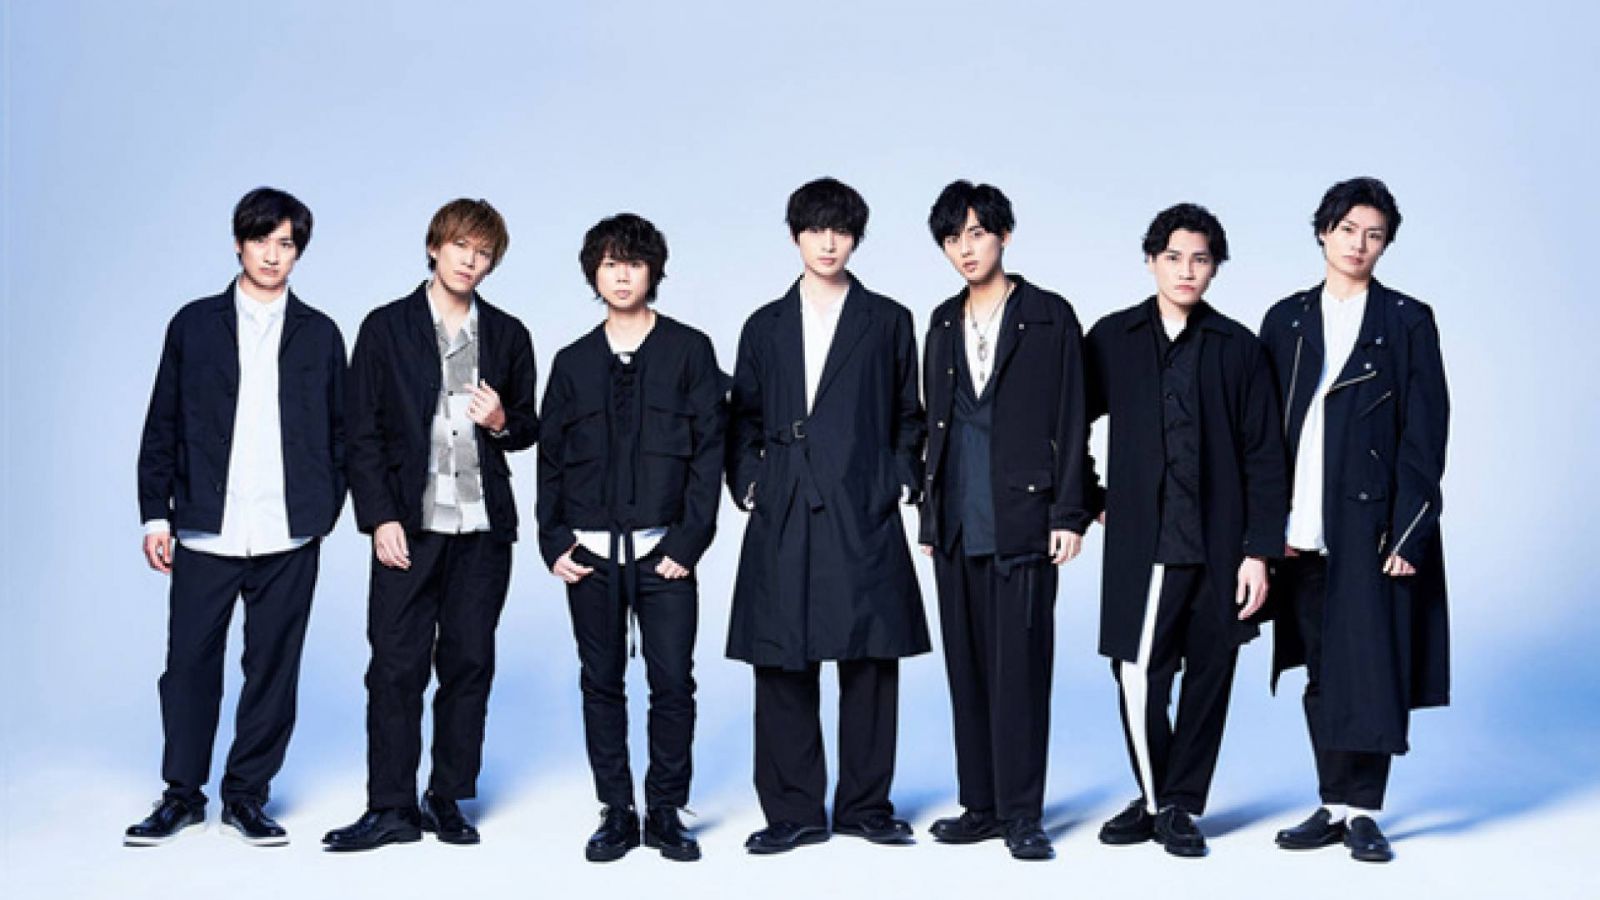 Nowy album Kis-My-Ft2 © avex trax. All rights reserved.